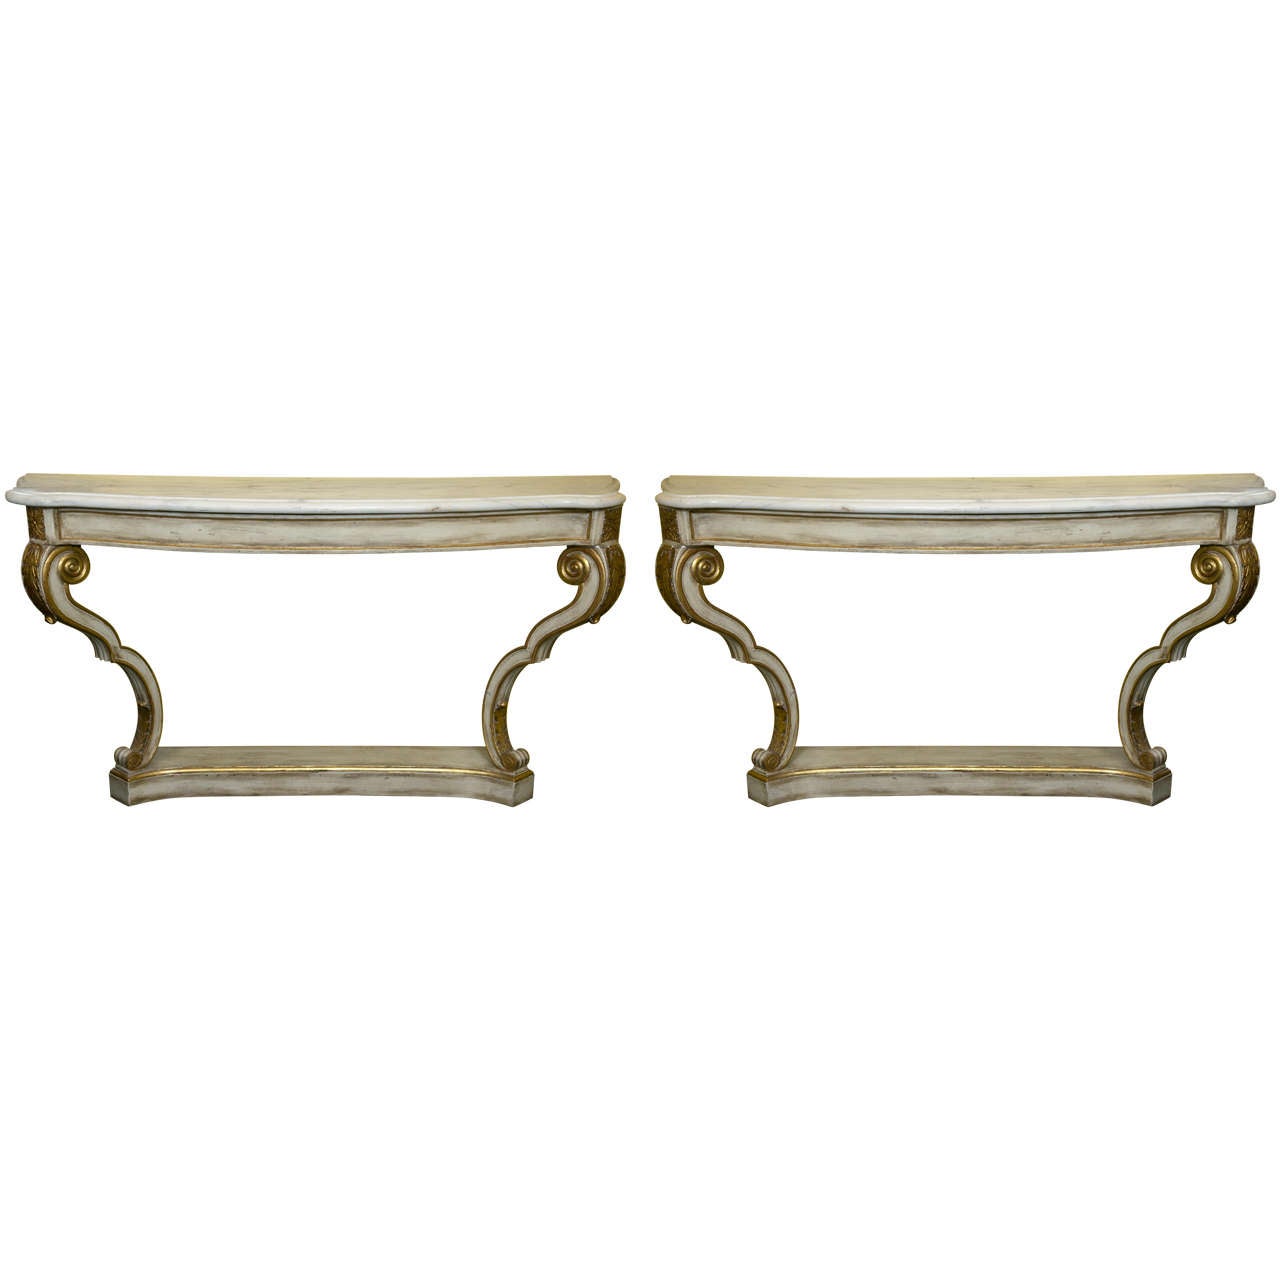 Pair of Maison Jansen Marble-Top Console Tables